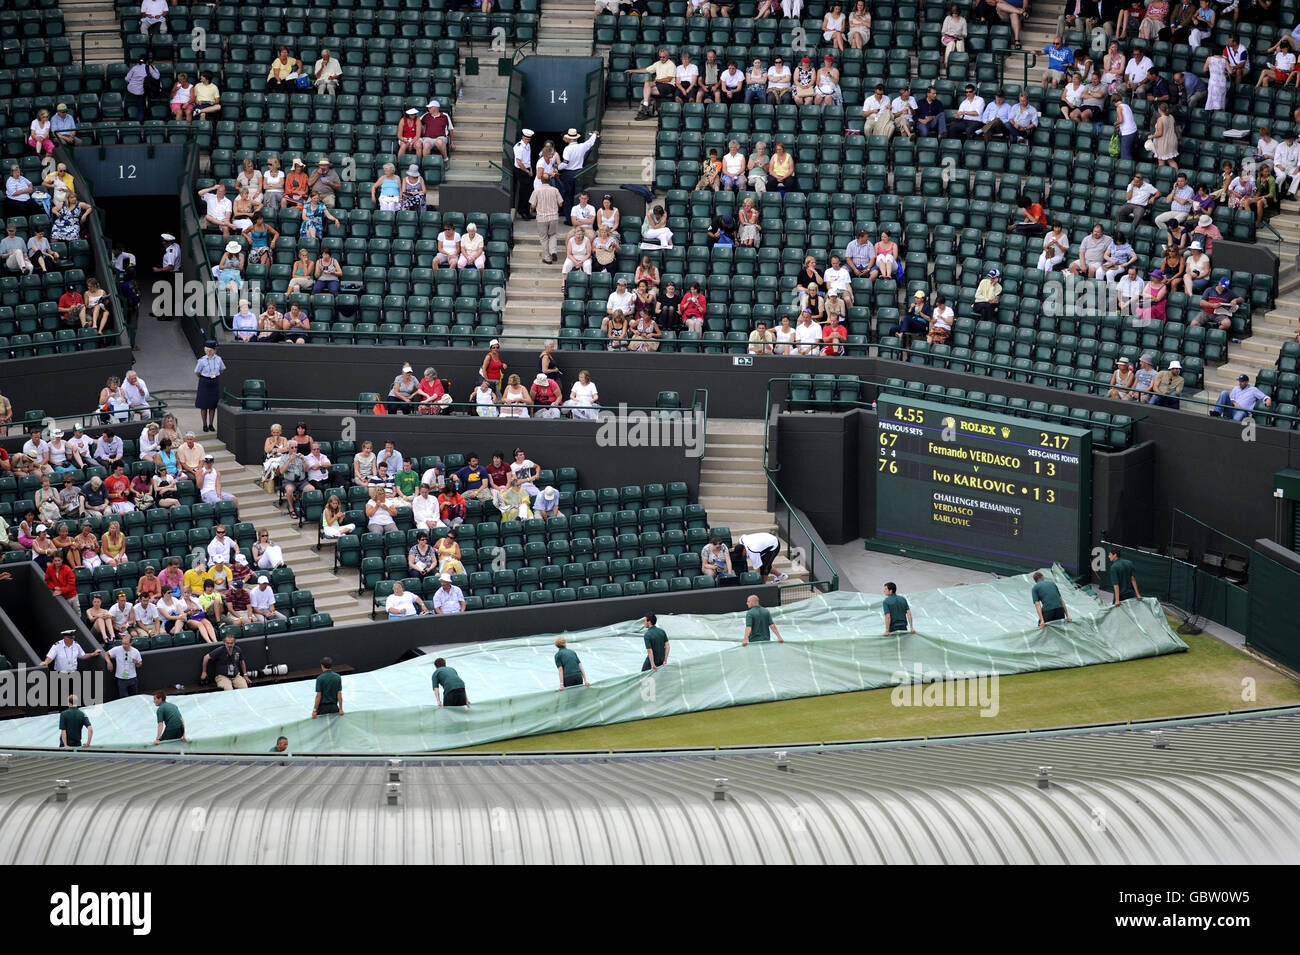 A view of the covers being taken off on Court One after rain delayed play during the Wimbledon Championships at the All England Lawn Tennis and Croquet Club, Wimbledon, London. Stock Photo